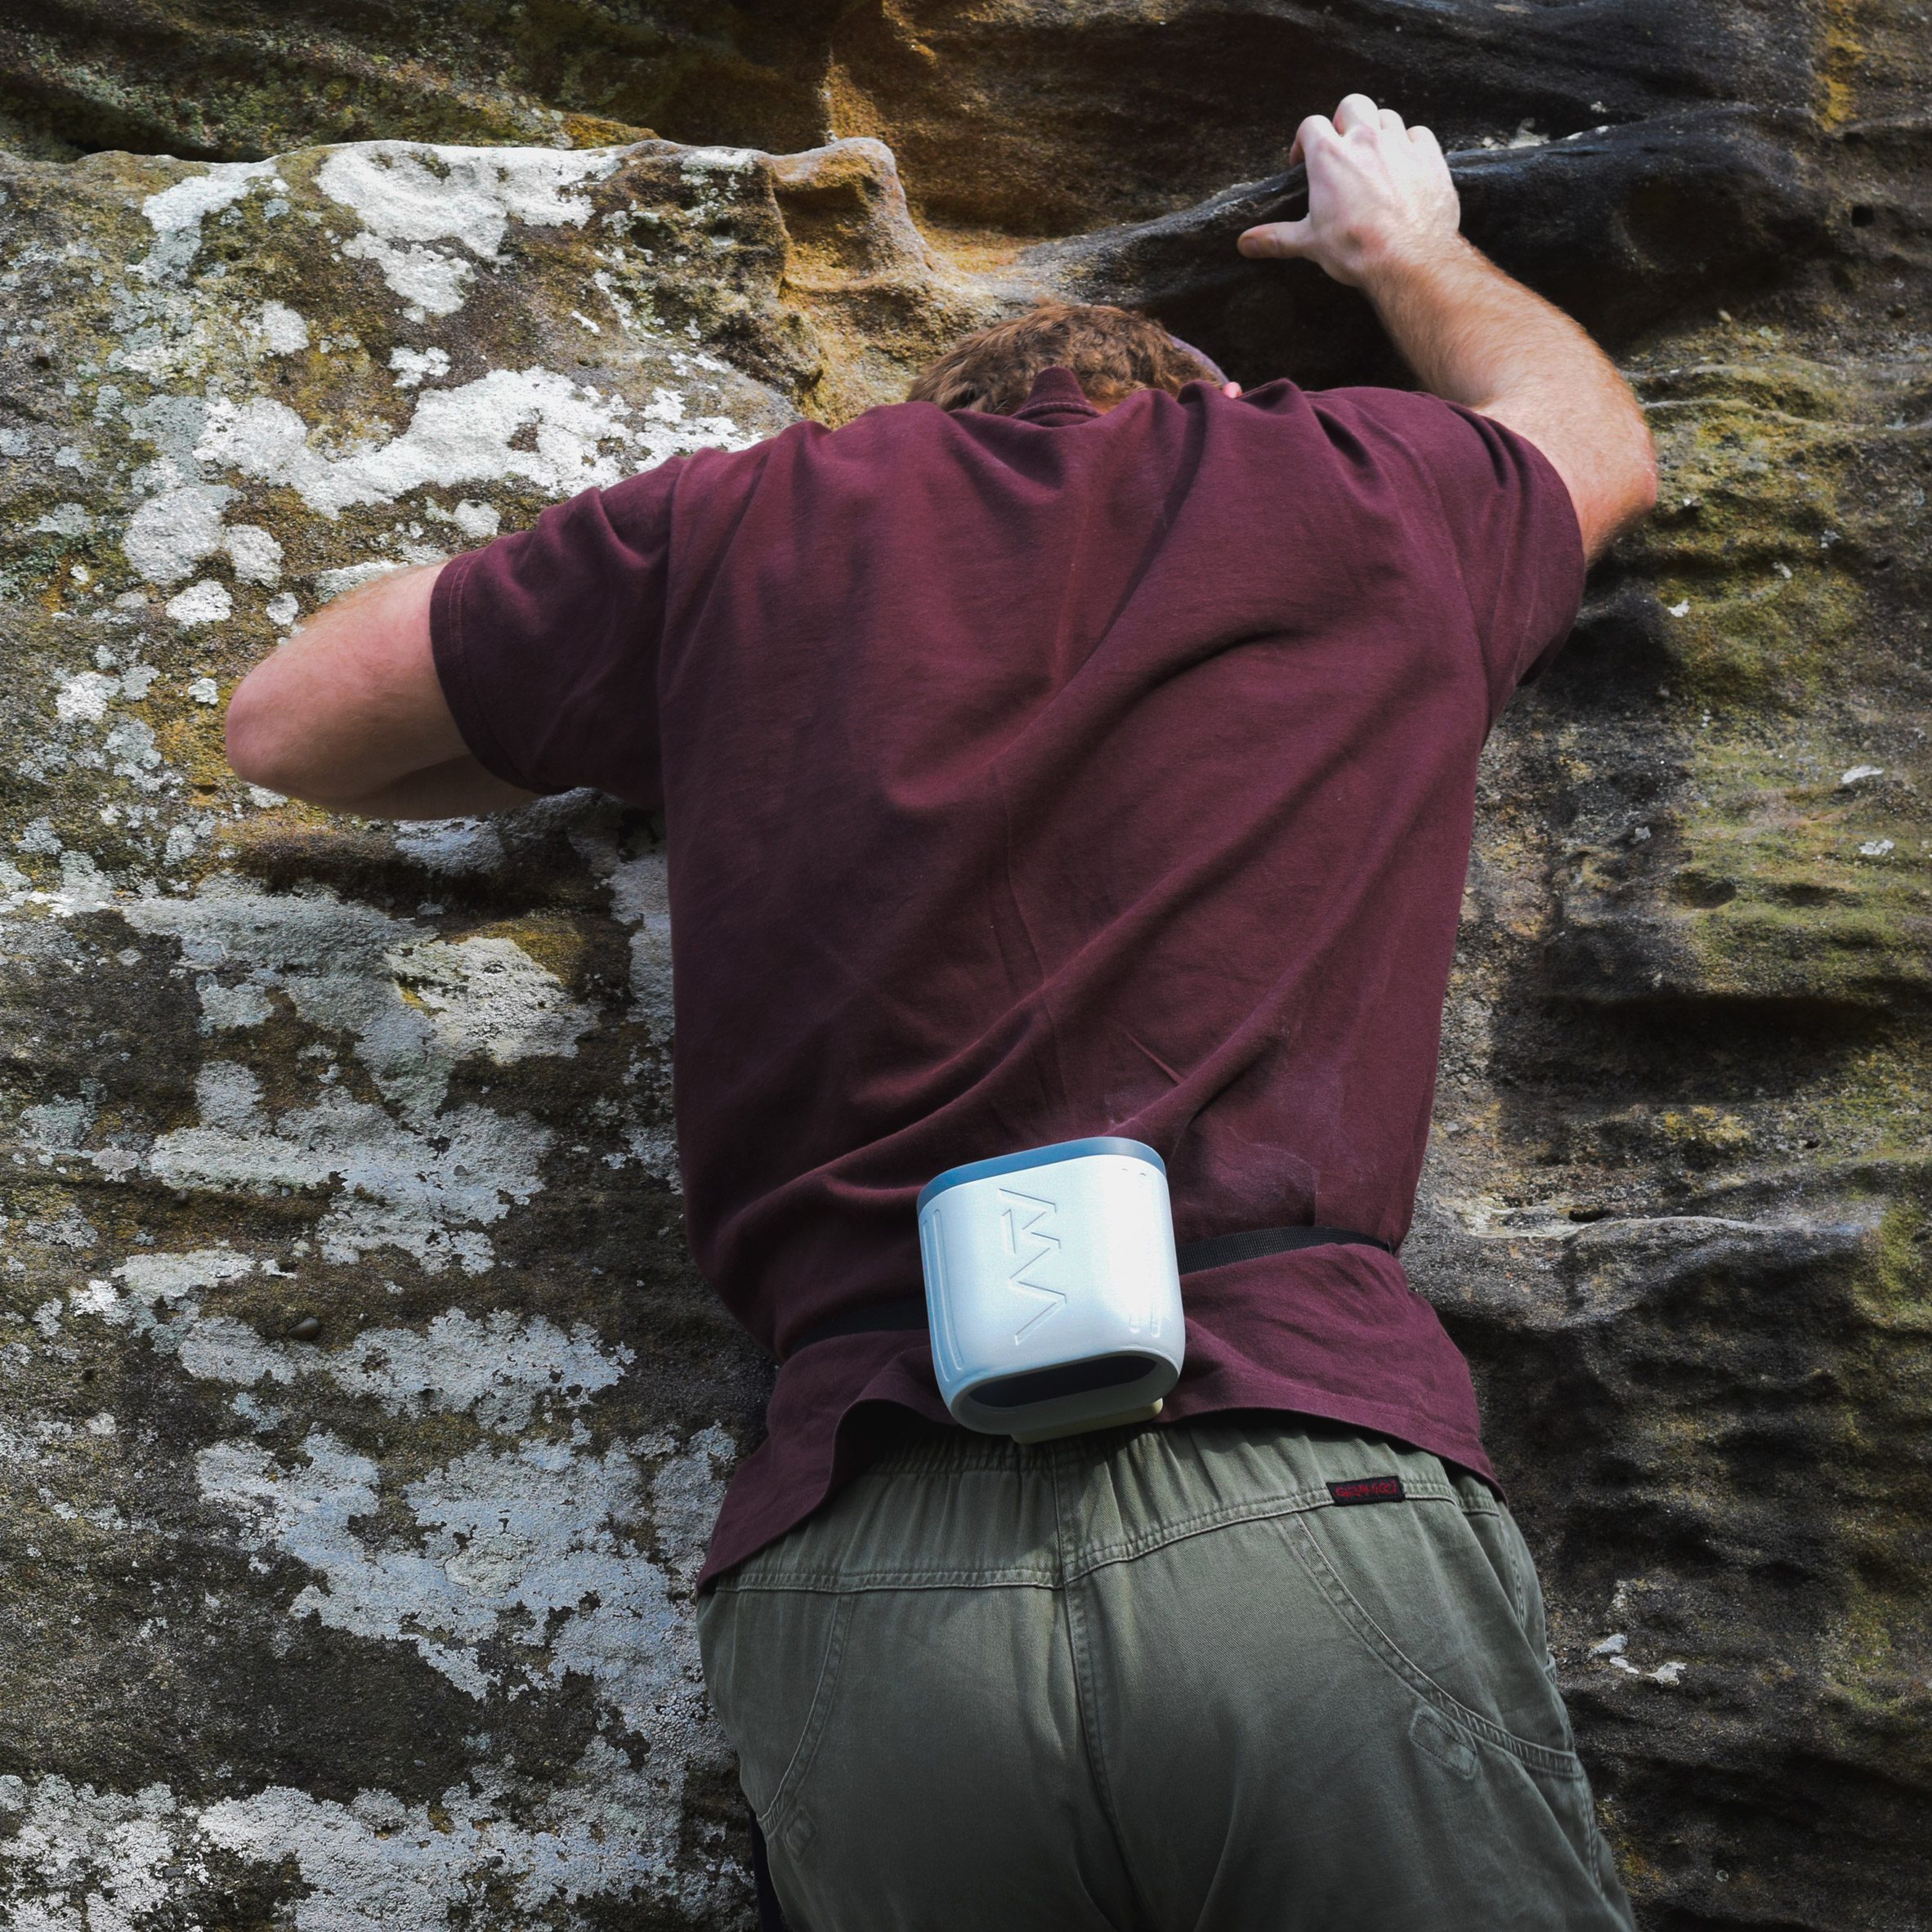 Photograph showing climber with portable fan attached to their back